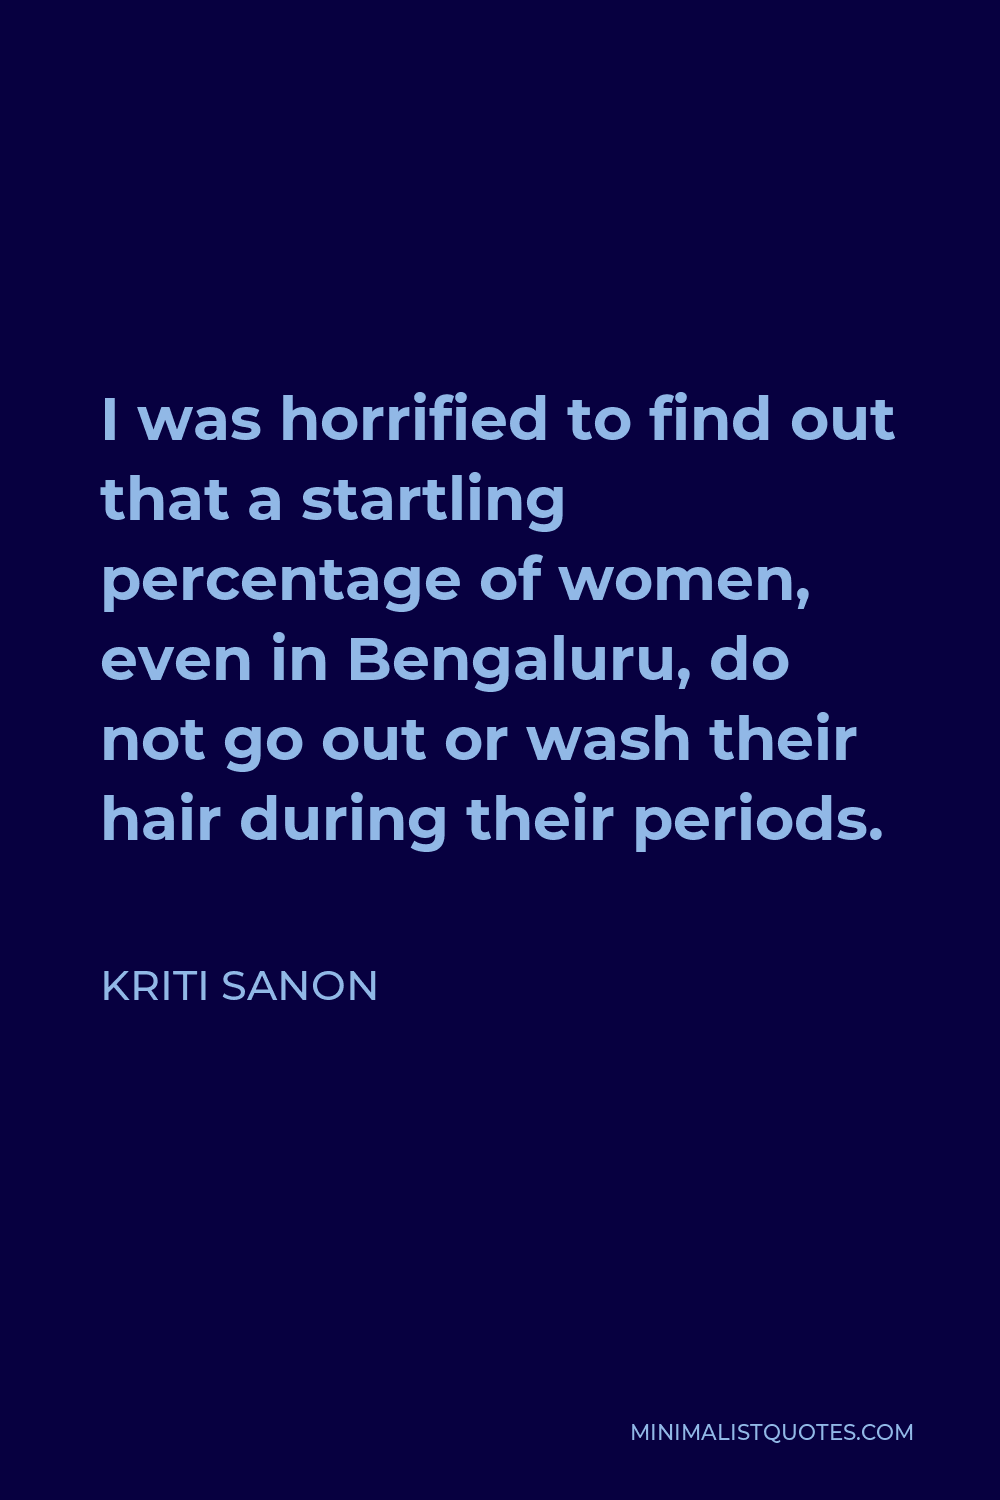 Kriti Sanon Quote: I was horrified to find out that a startling percentage  of women, even in Bengaluru, do not go out or wash their hair during their  periods.